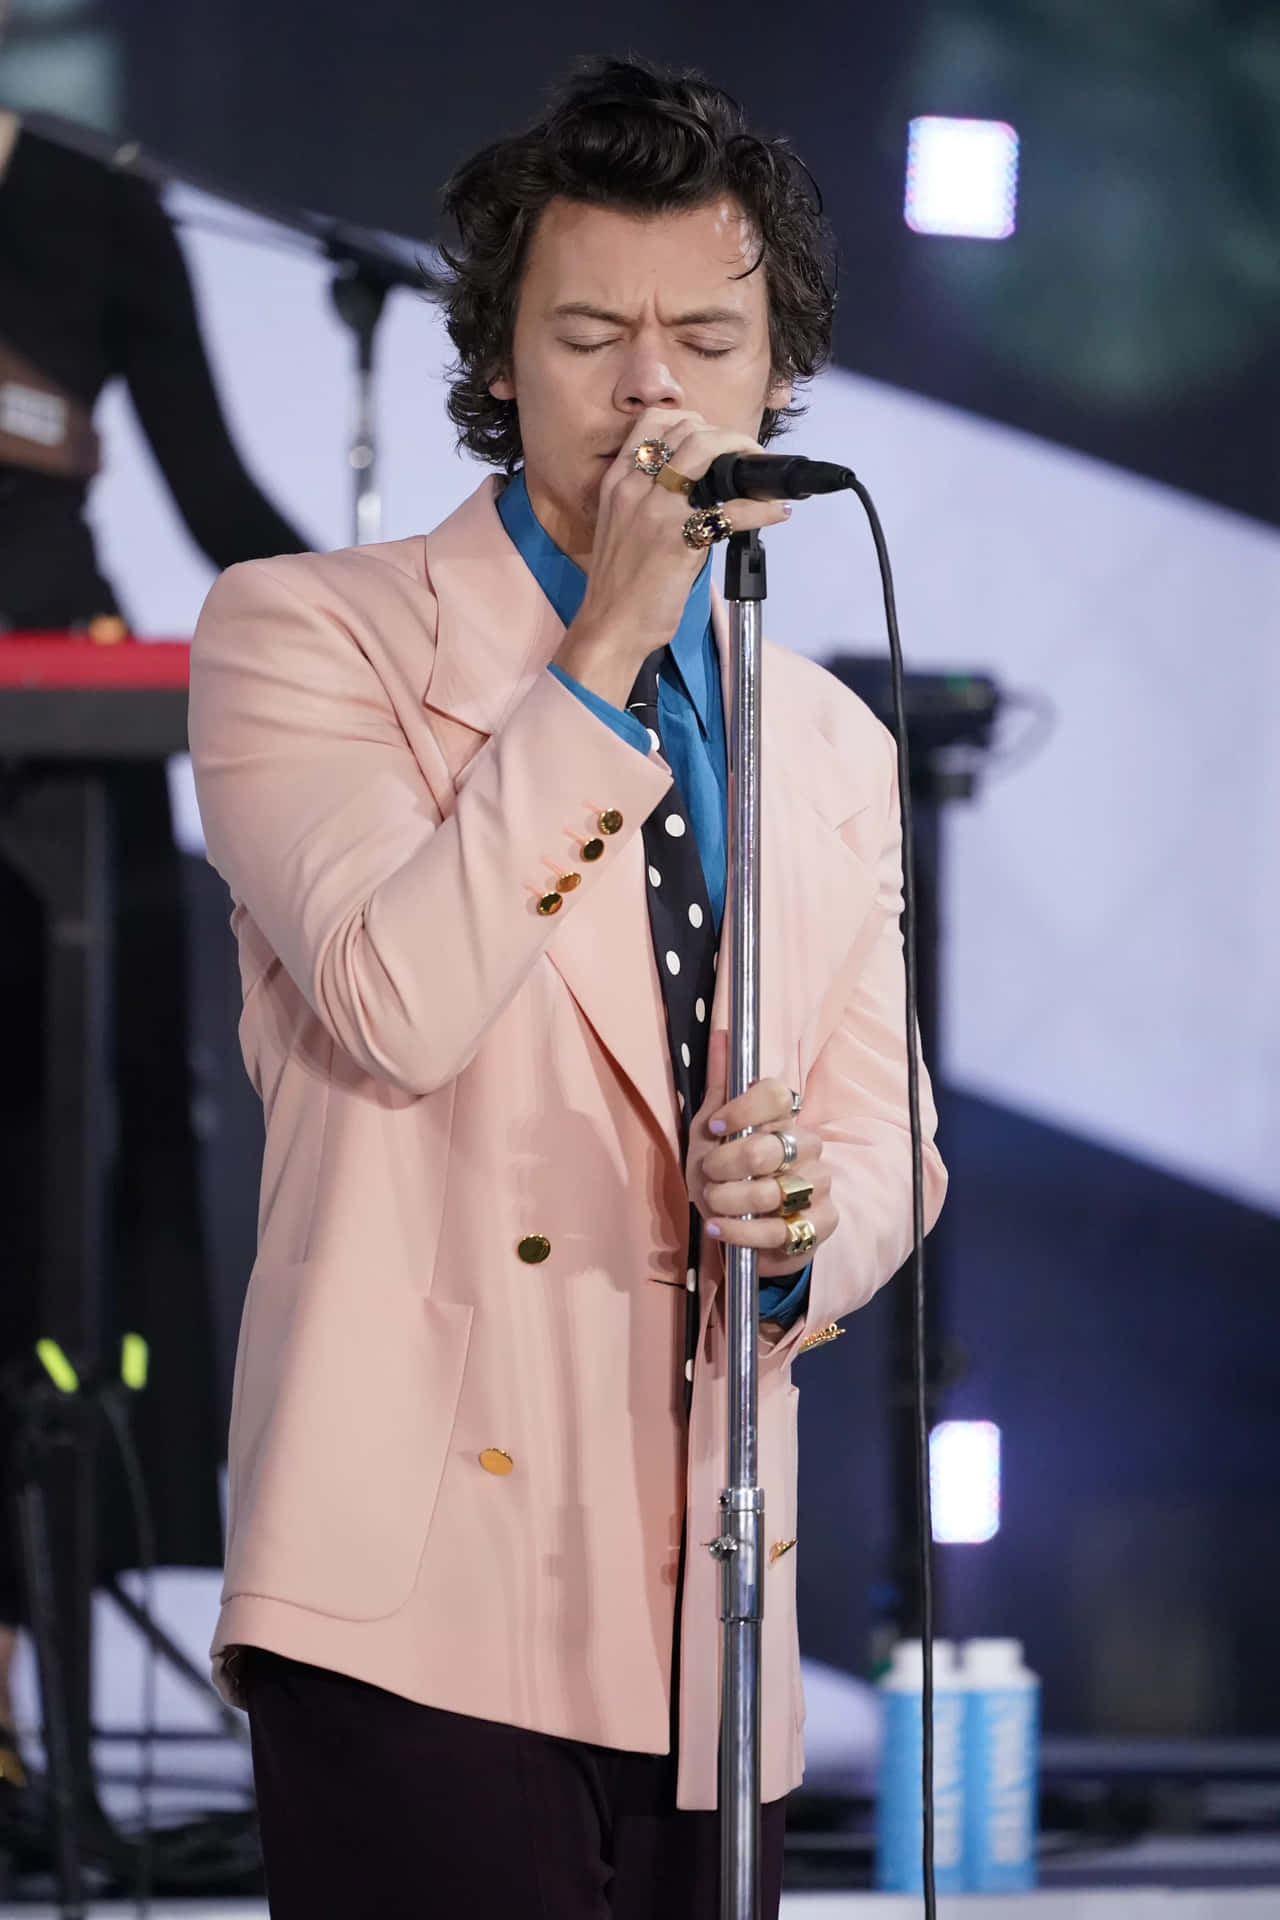 Harry Styles Embracing Change in 2021